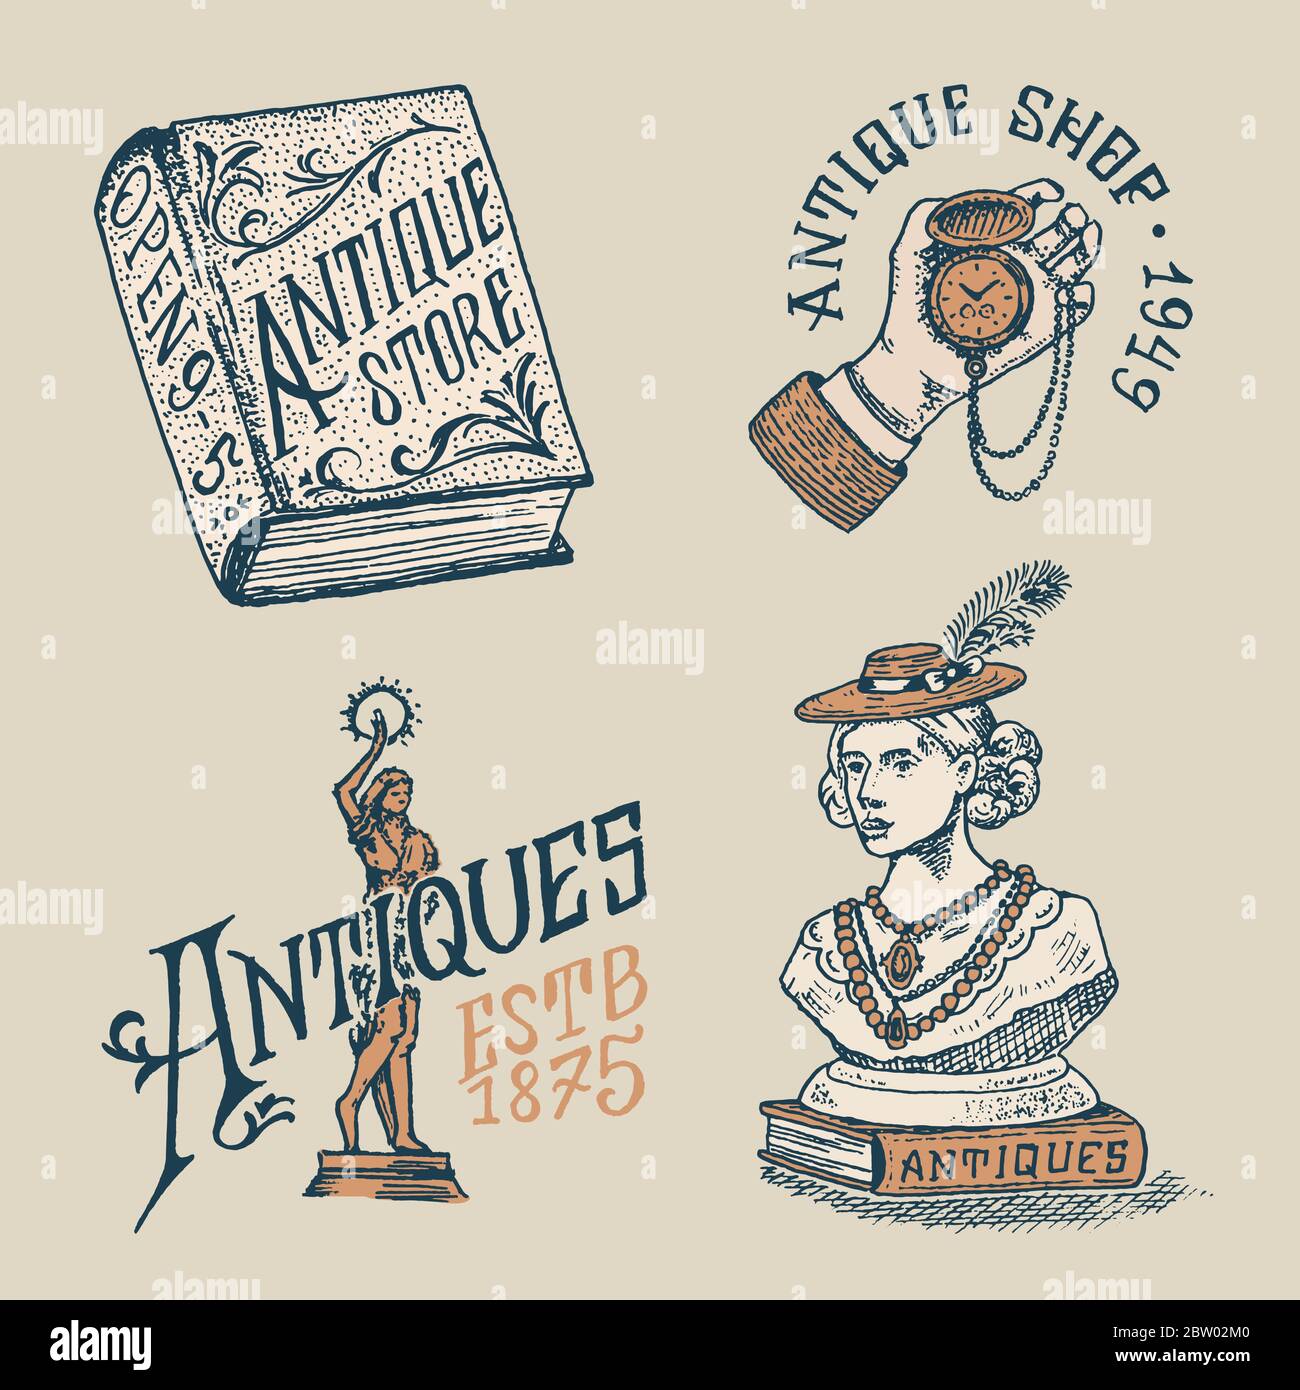 https://c8.alamy.com/comp/2BW02M0/antique-shop-labels-or-badges-vintage-victorian-ancient-logo-for-t-shirts-and-typography-clock-in-hand-woman-sculpture-book-and-lettering-old-2BW02M0.jpg